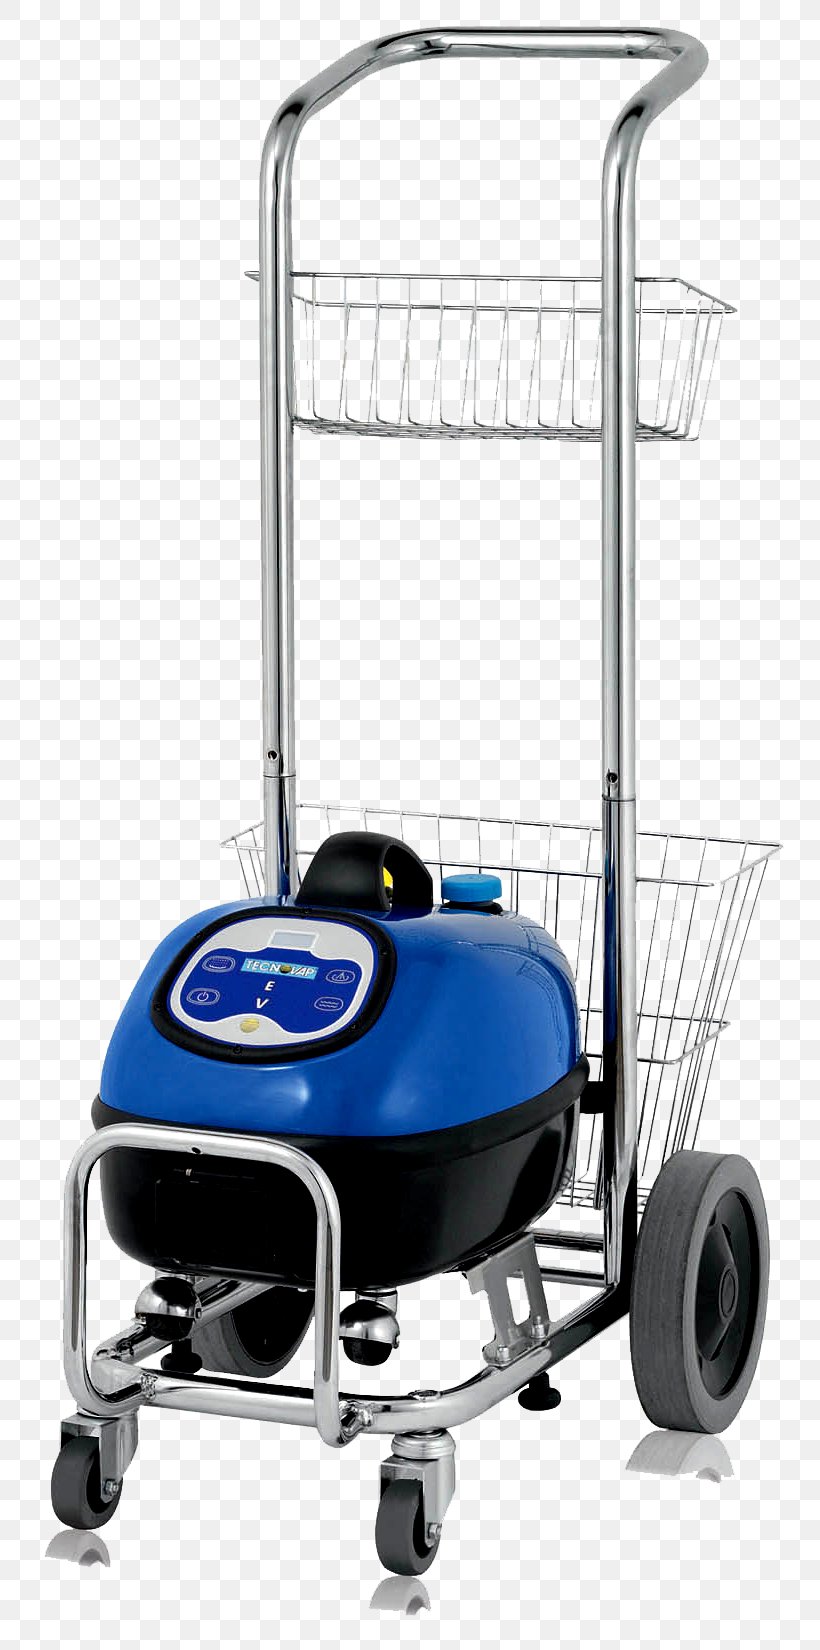 Vapor Steam Cleaner Pressure Washers Vacuum Cleaner, PNG, 750x1650px, Vapor Steam Cleaner, Cleaner, Cleaning, Cleanliness, Electric Blue Download Free